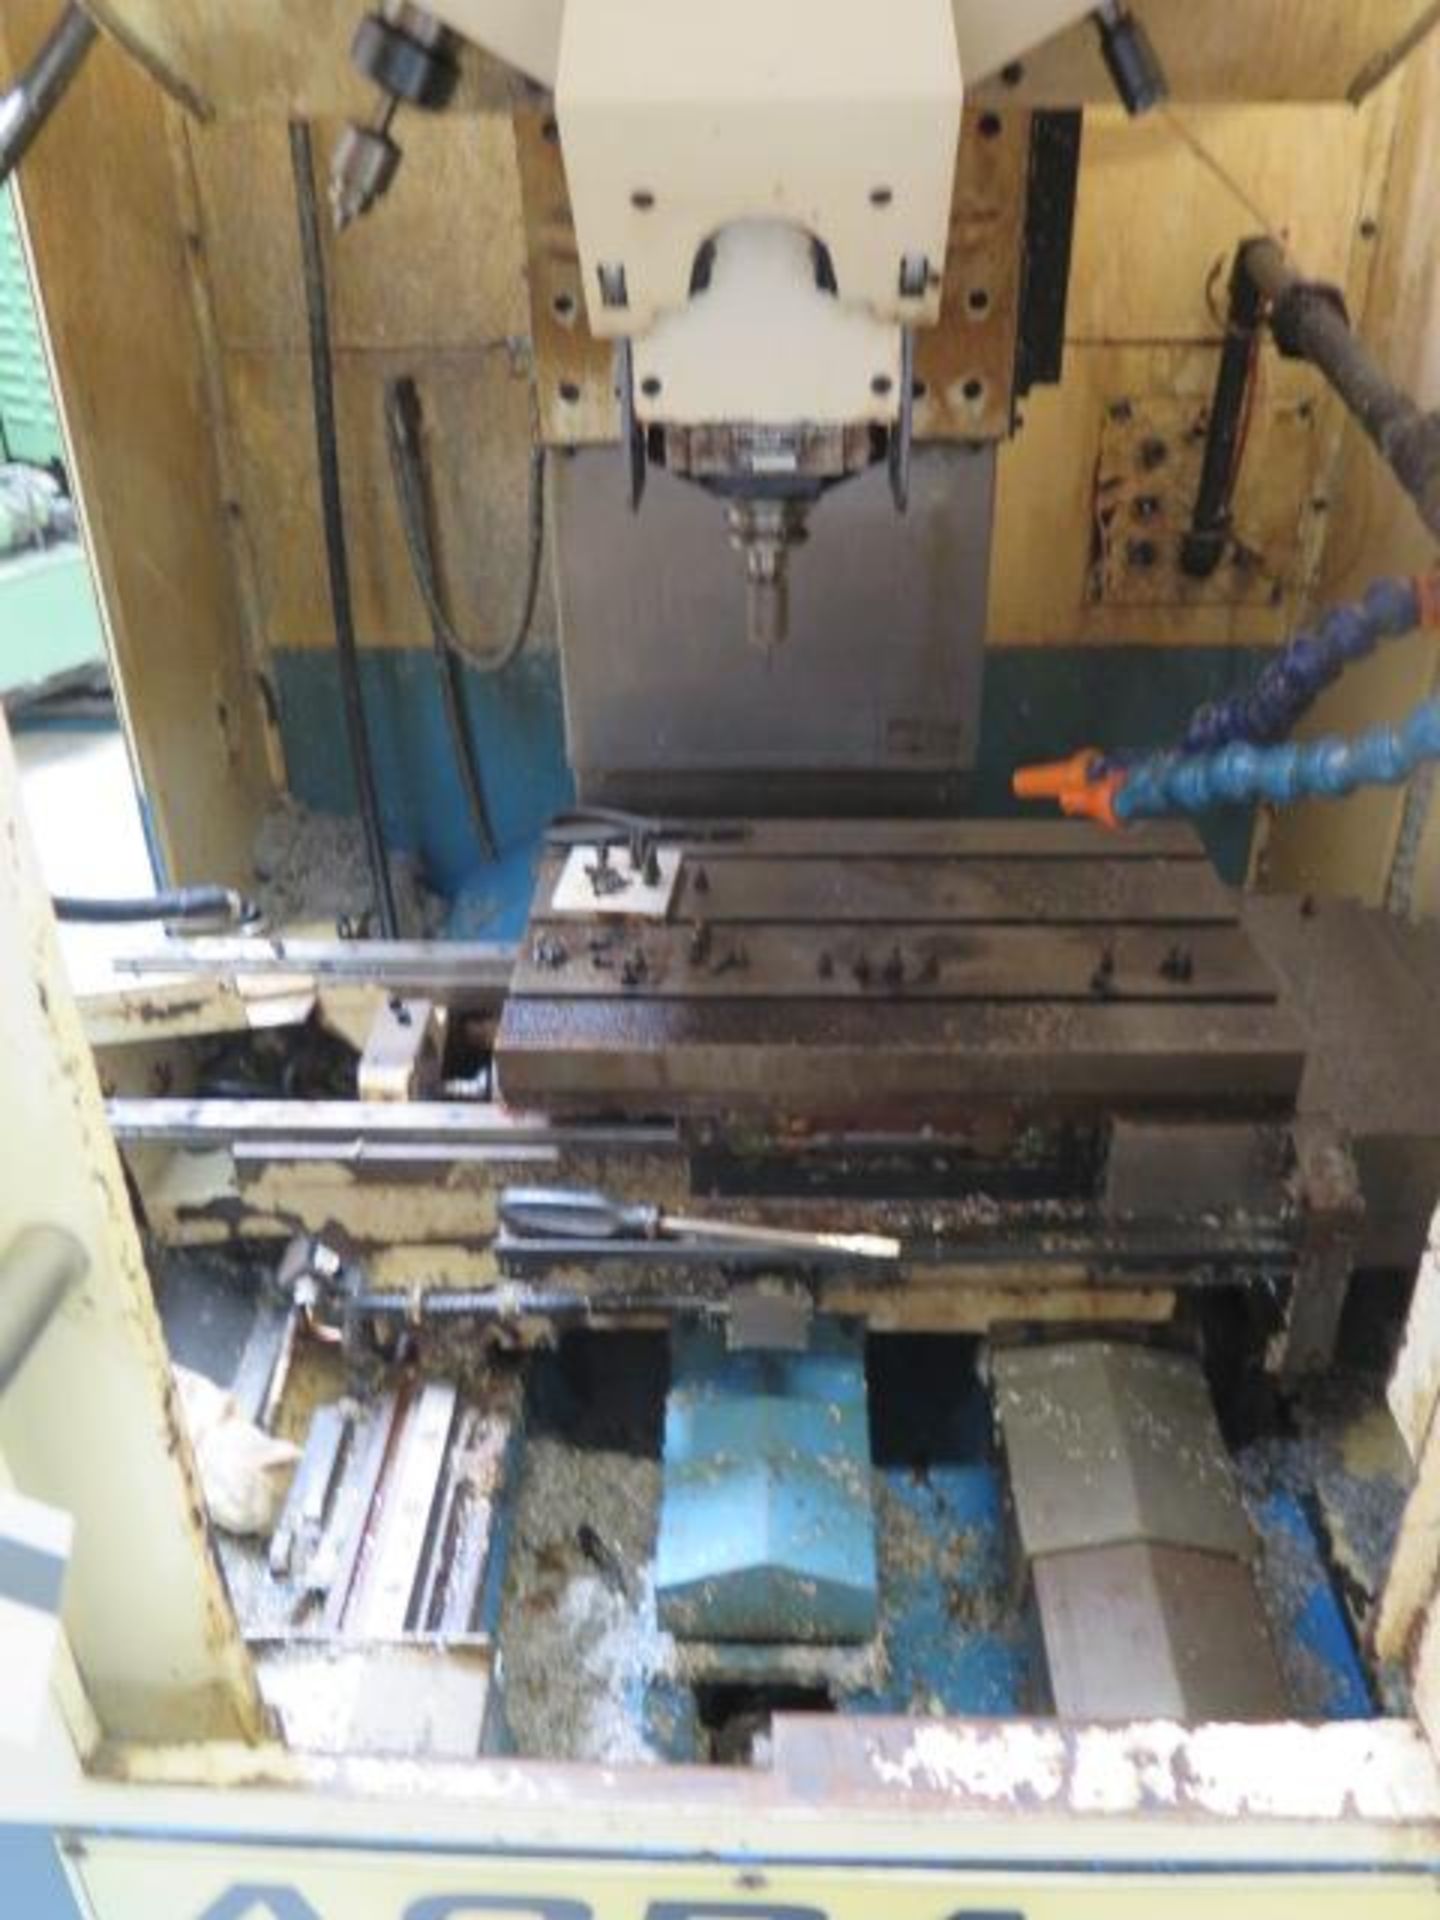 2003 Acra ADT-450 CNC Drilling /Tapping Center s/n MA5V0012285 (NEEDS REPAIR) w/ Mits 50M, OLD AS IS - Bild 4 aus 14